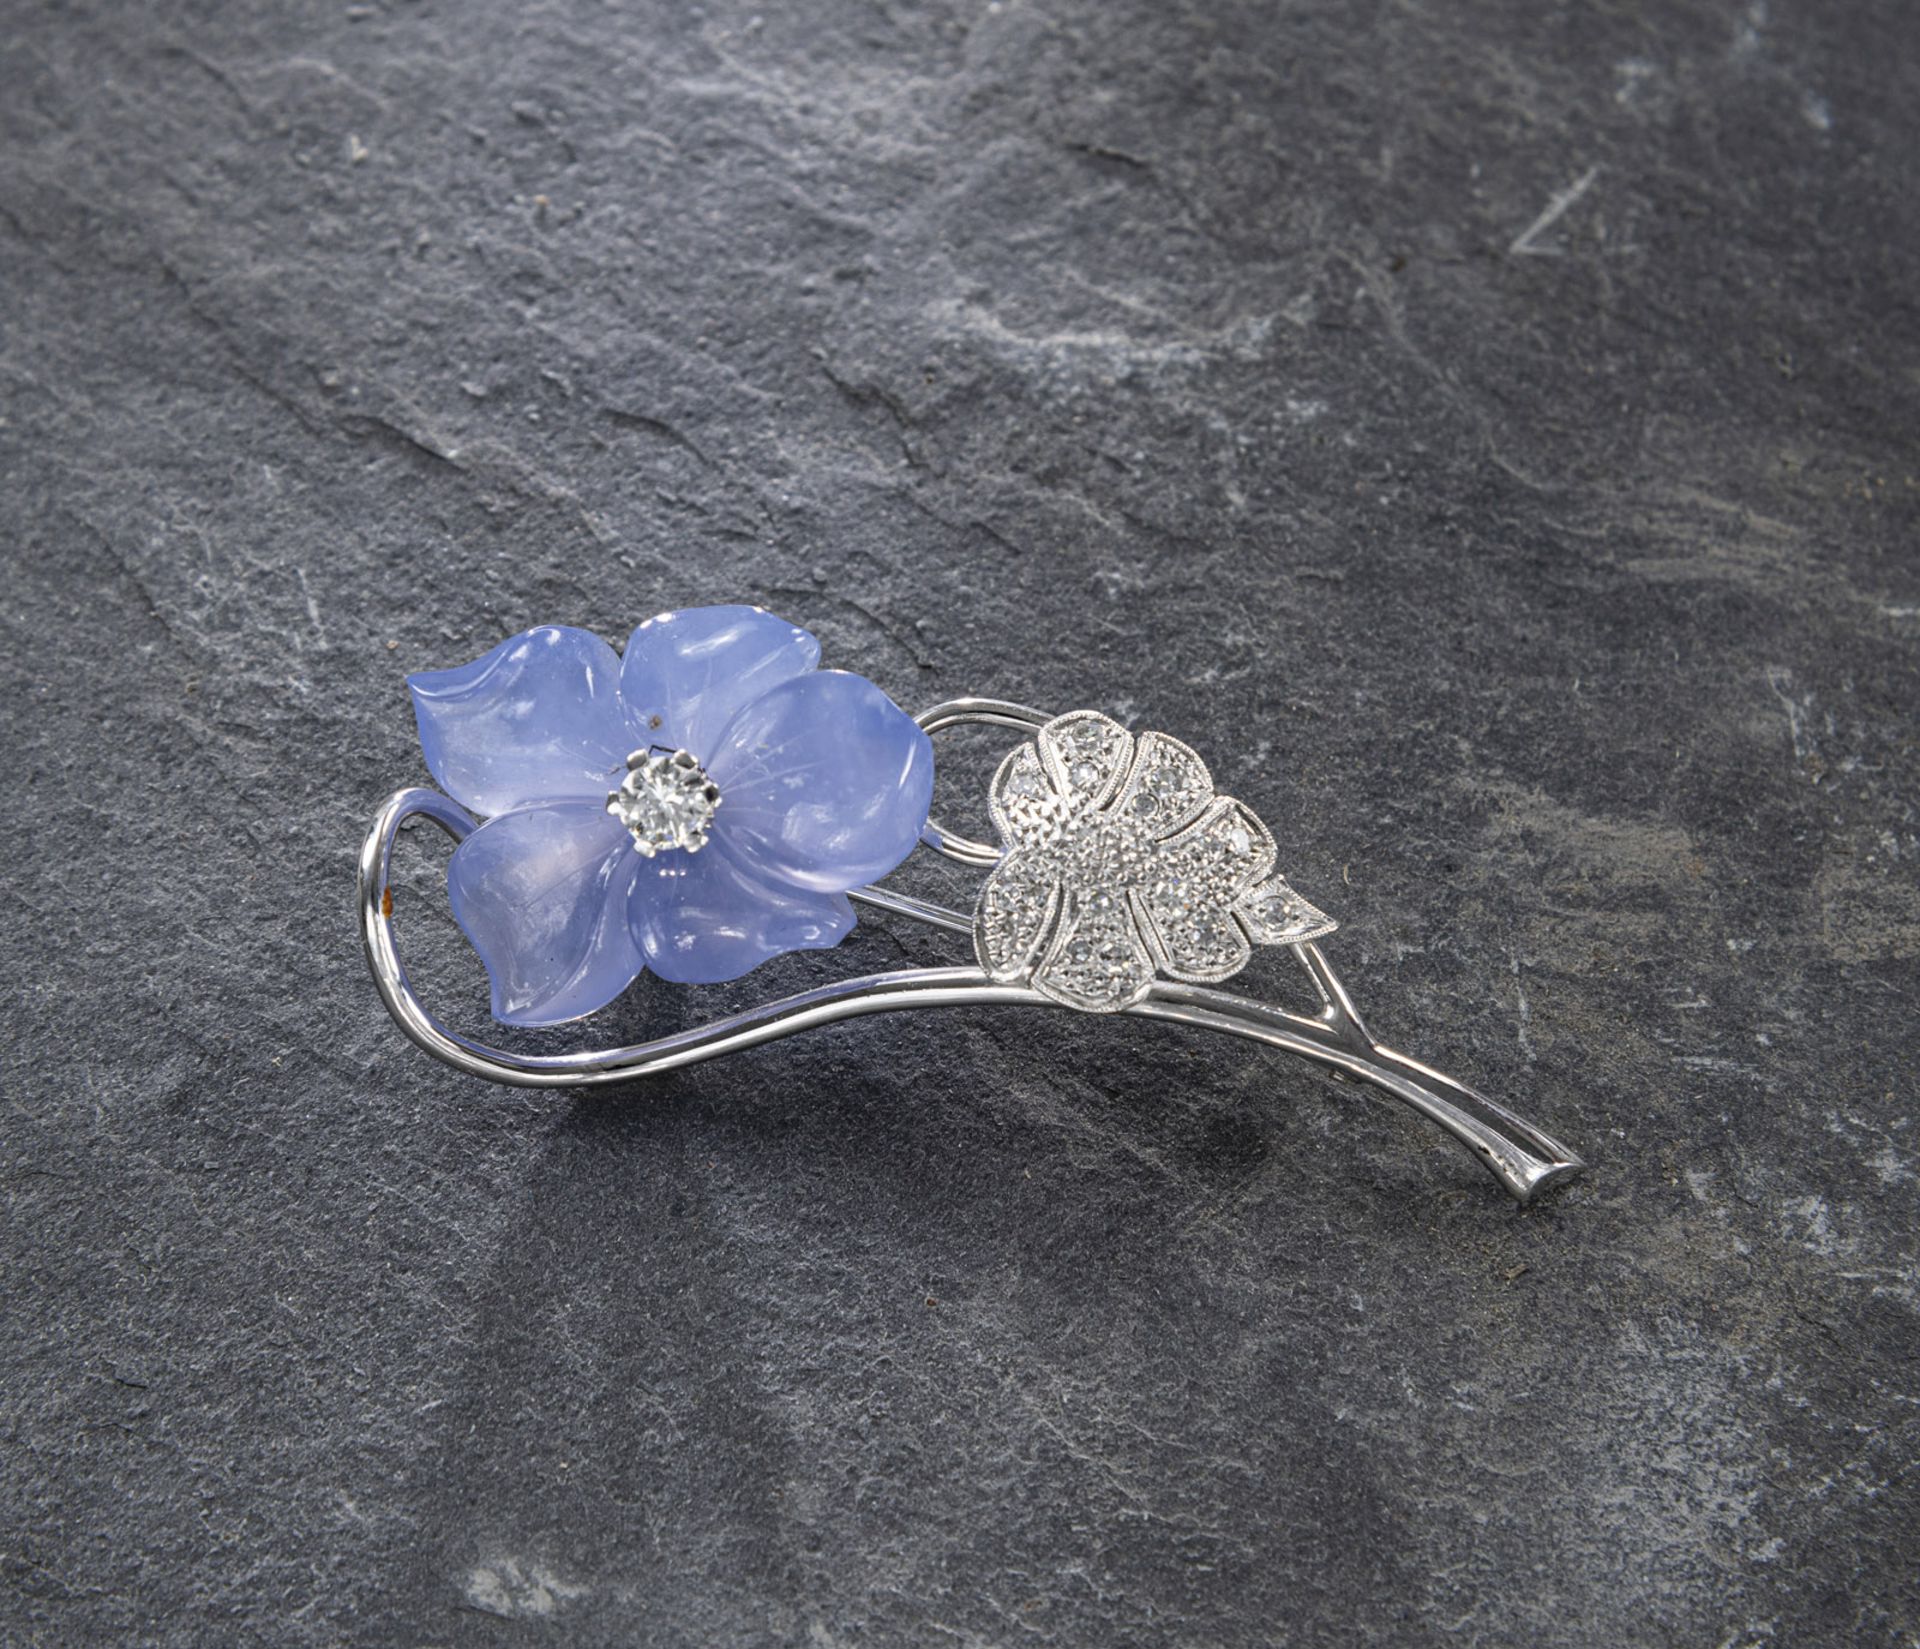 FLORIFORM CHALCEDONY AND DIAMOND BROOCH - Image 2 of 3